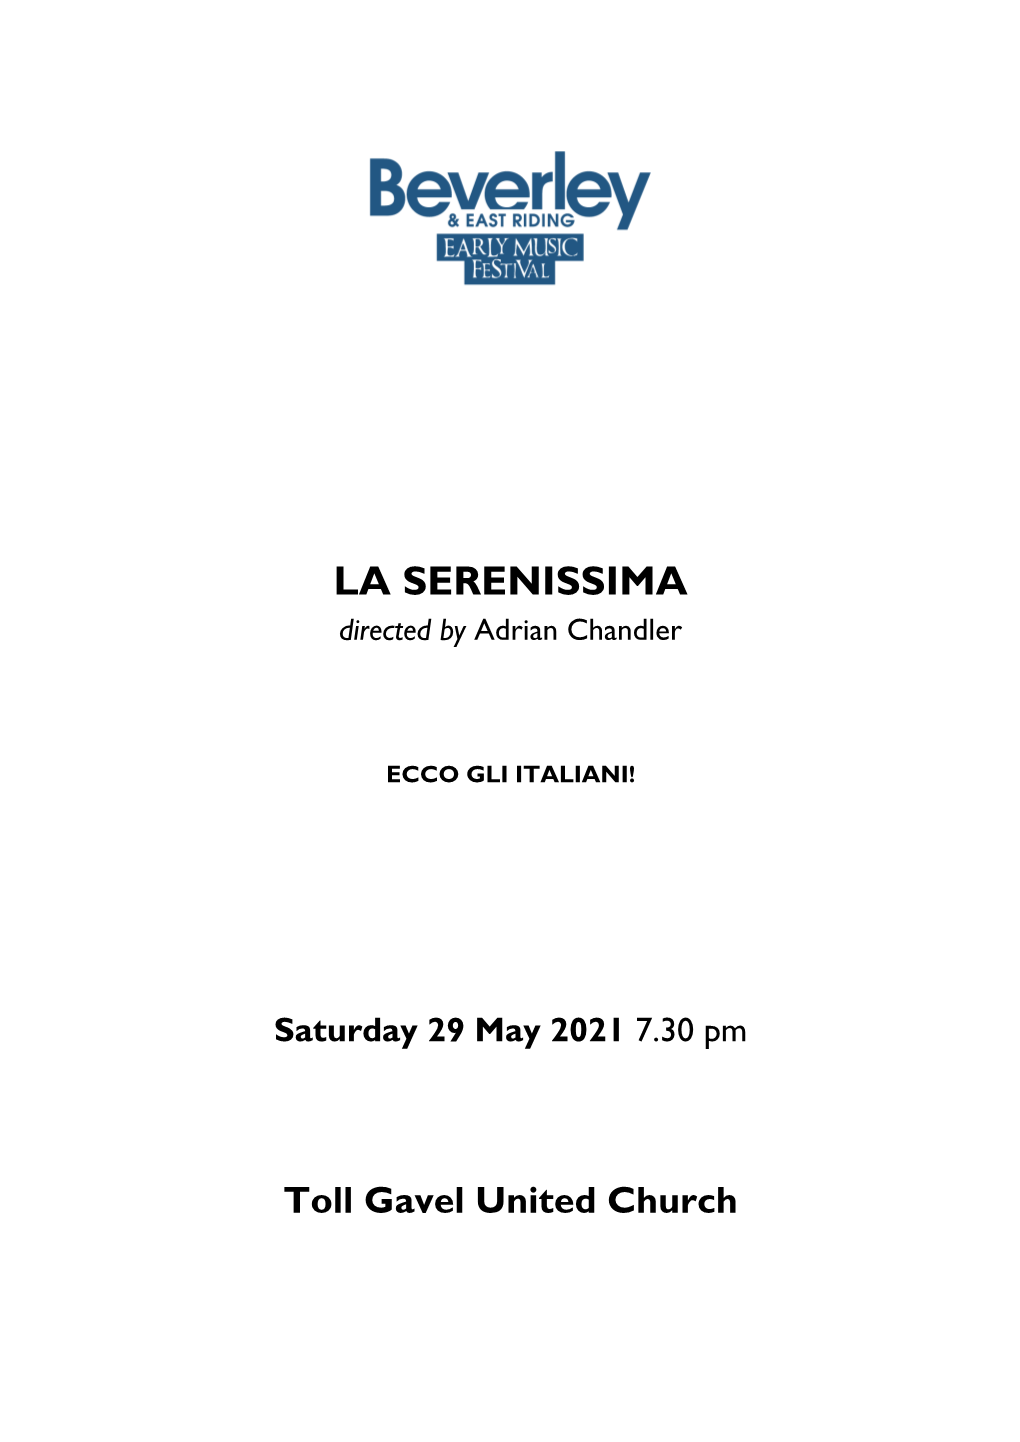 LA SERENISSIMA Directed by Adrian Chandler